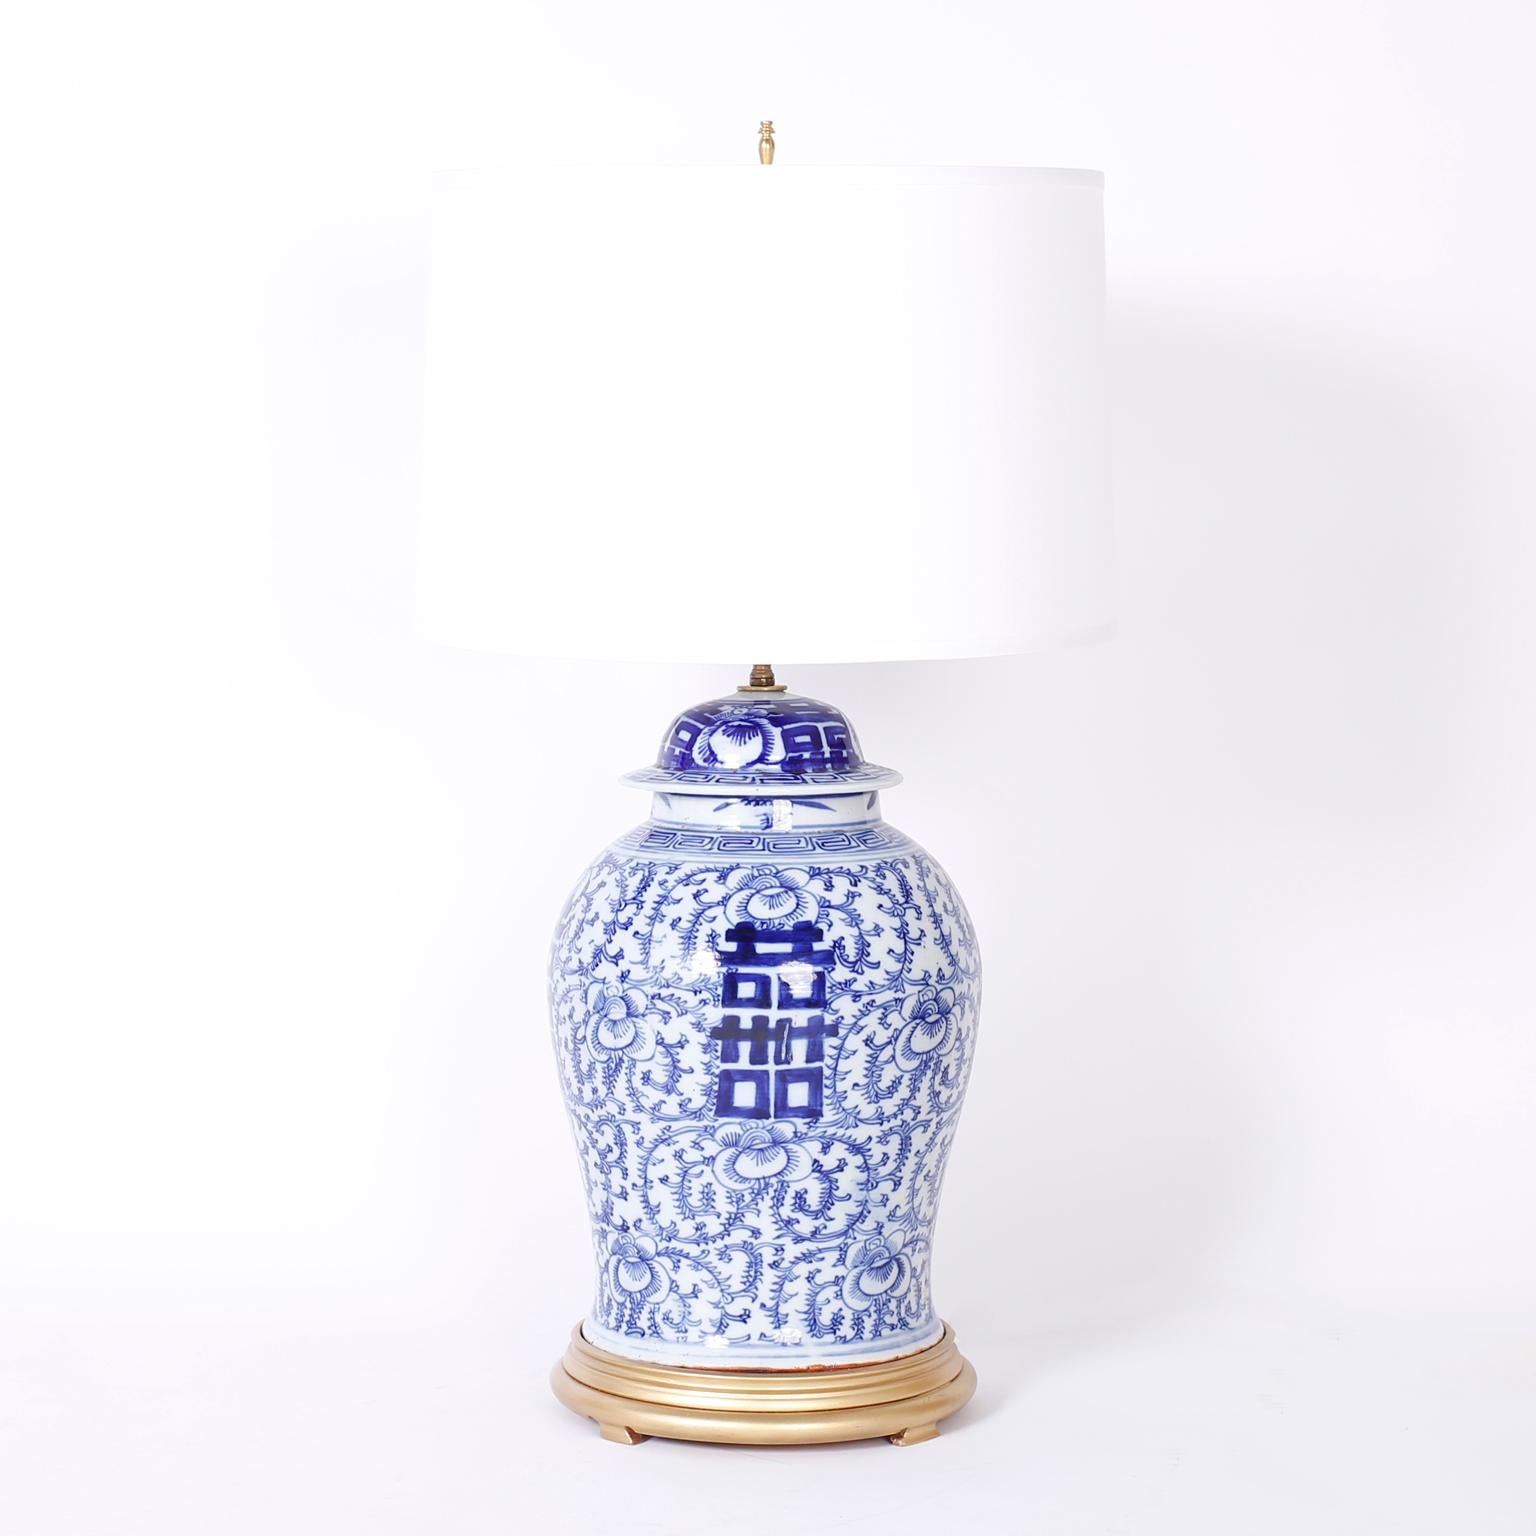 Pair of Chinese blue and white porcelain table lamps with happiness characters on an elaborate floral background, once antique ginger jars now table lamps.